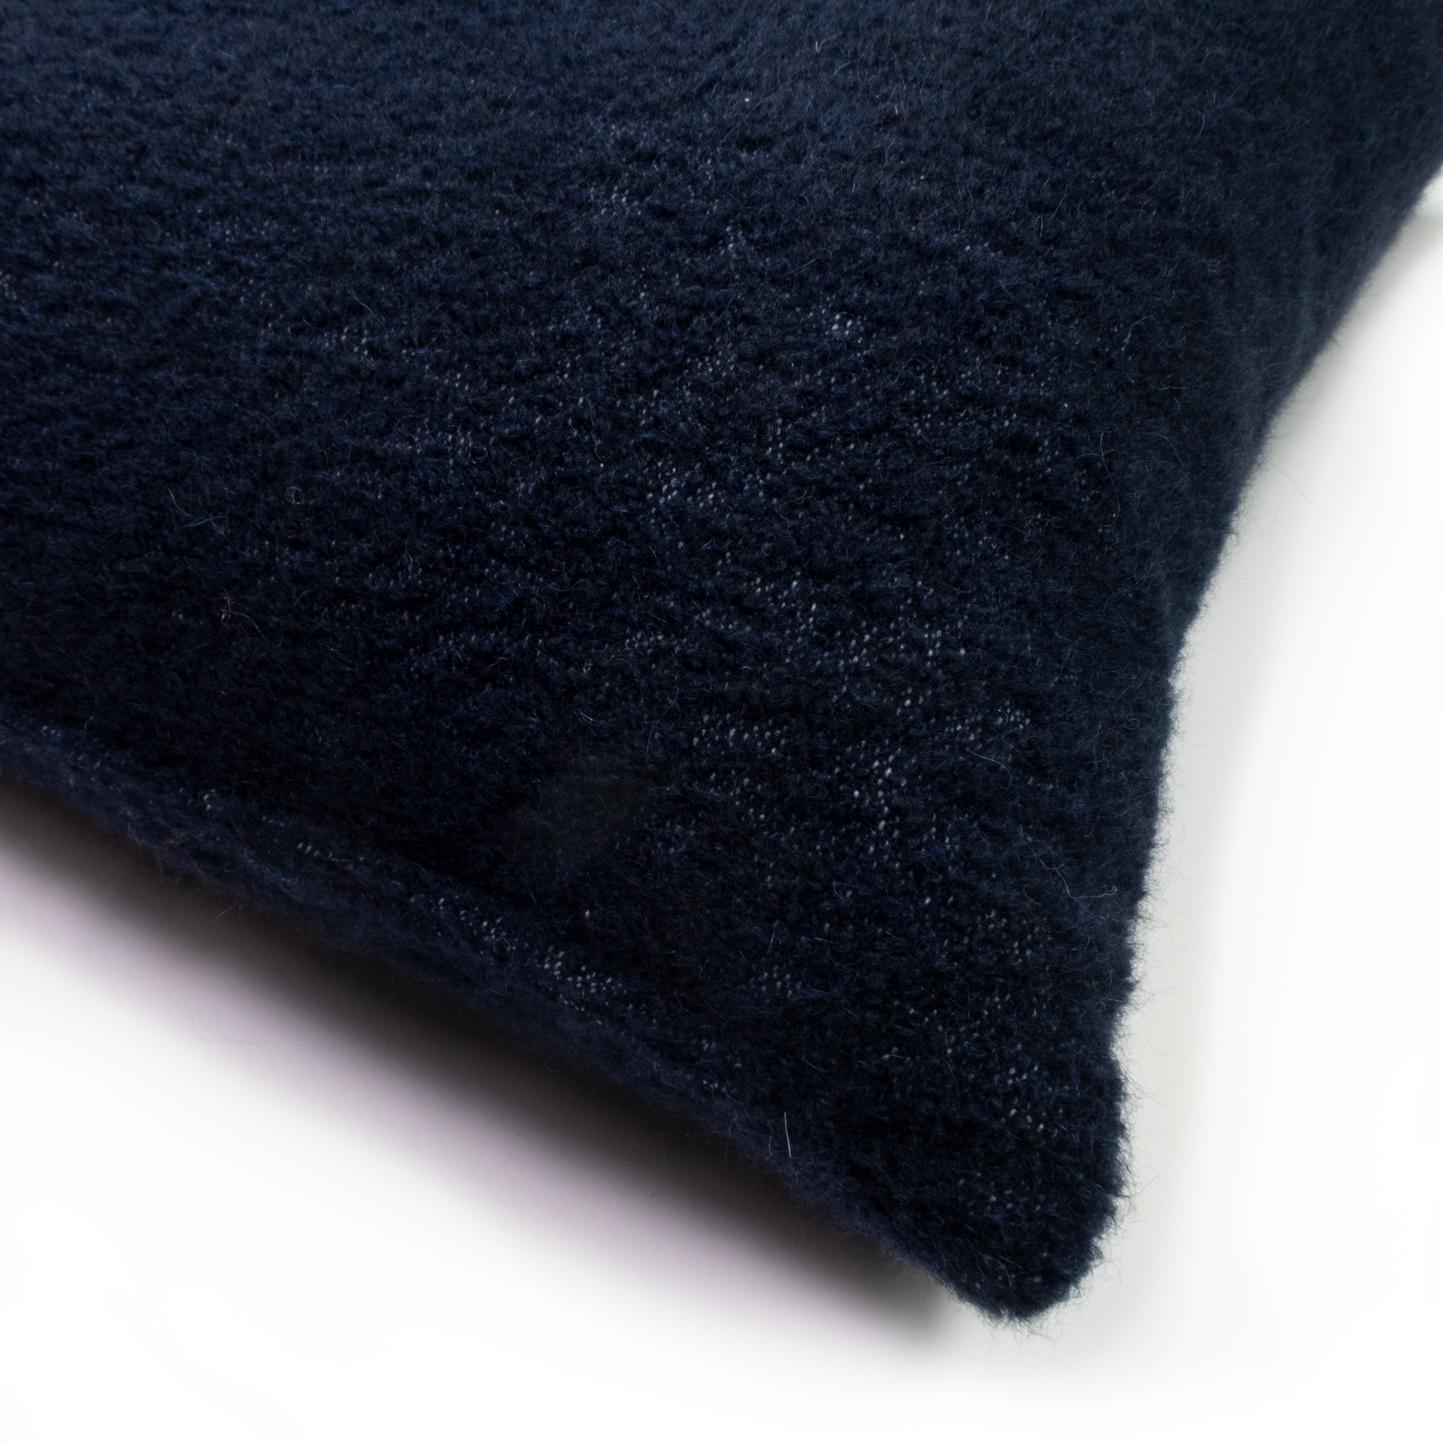 Often considered as one of the most plush and comfortable fabrics in the world of textiles, alpaca wool is the peak blend of luxury and comfort. By using it in our Chérie cushions, Evolution21 is able to bring such opulence to your home decor. It